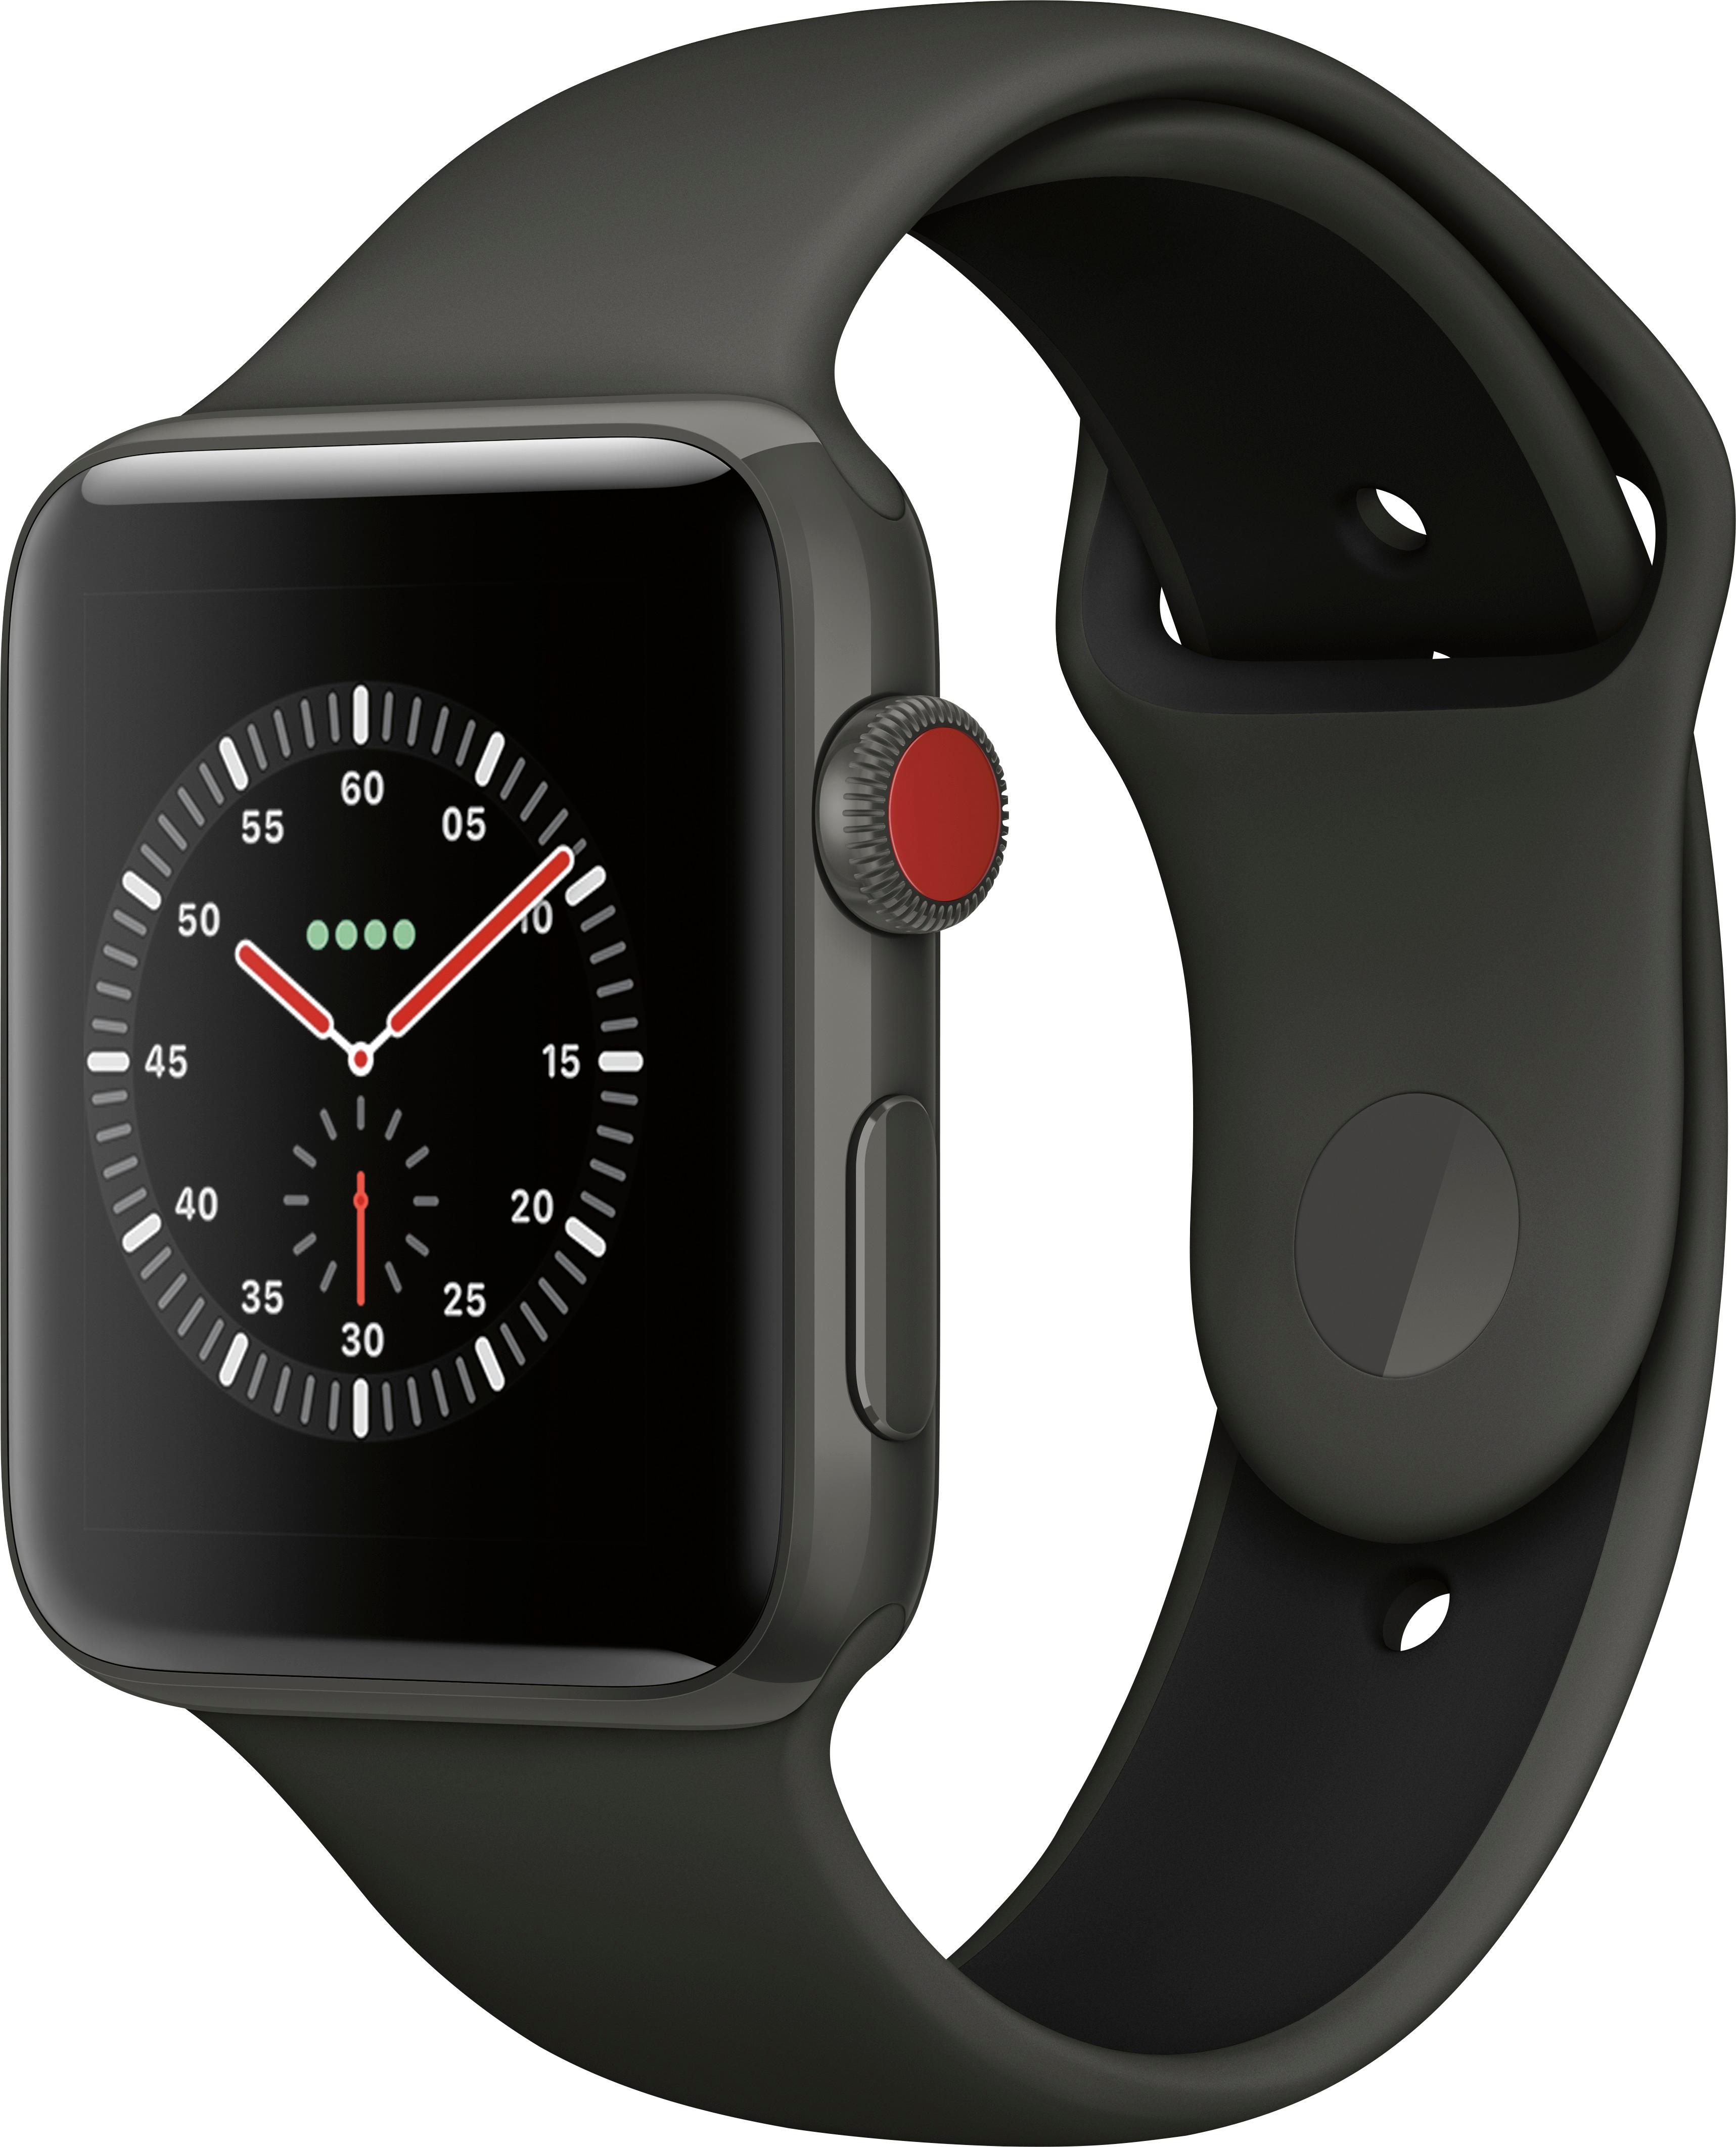 Angle View: Apple Watch Nike Series 5 (GPS + Cellular) 44mm Space Gray Aluminum Case with Anthracite/Black Nike Sport Band - Space Gray Aluminum (Sprint)